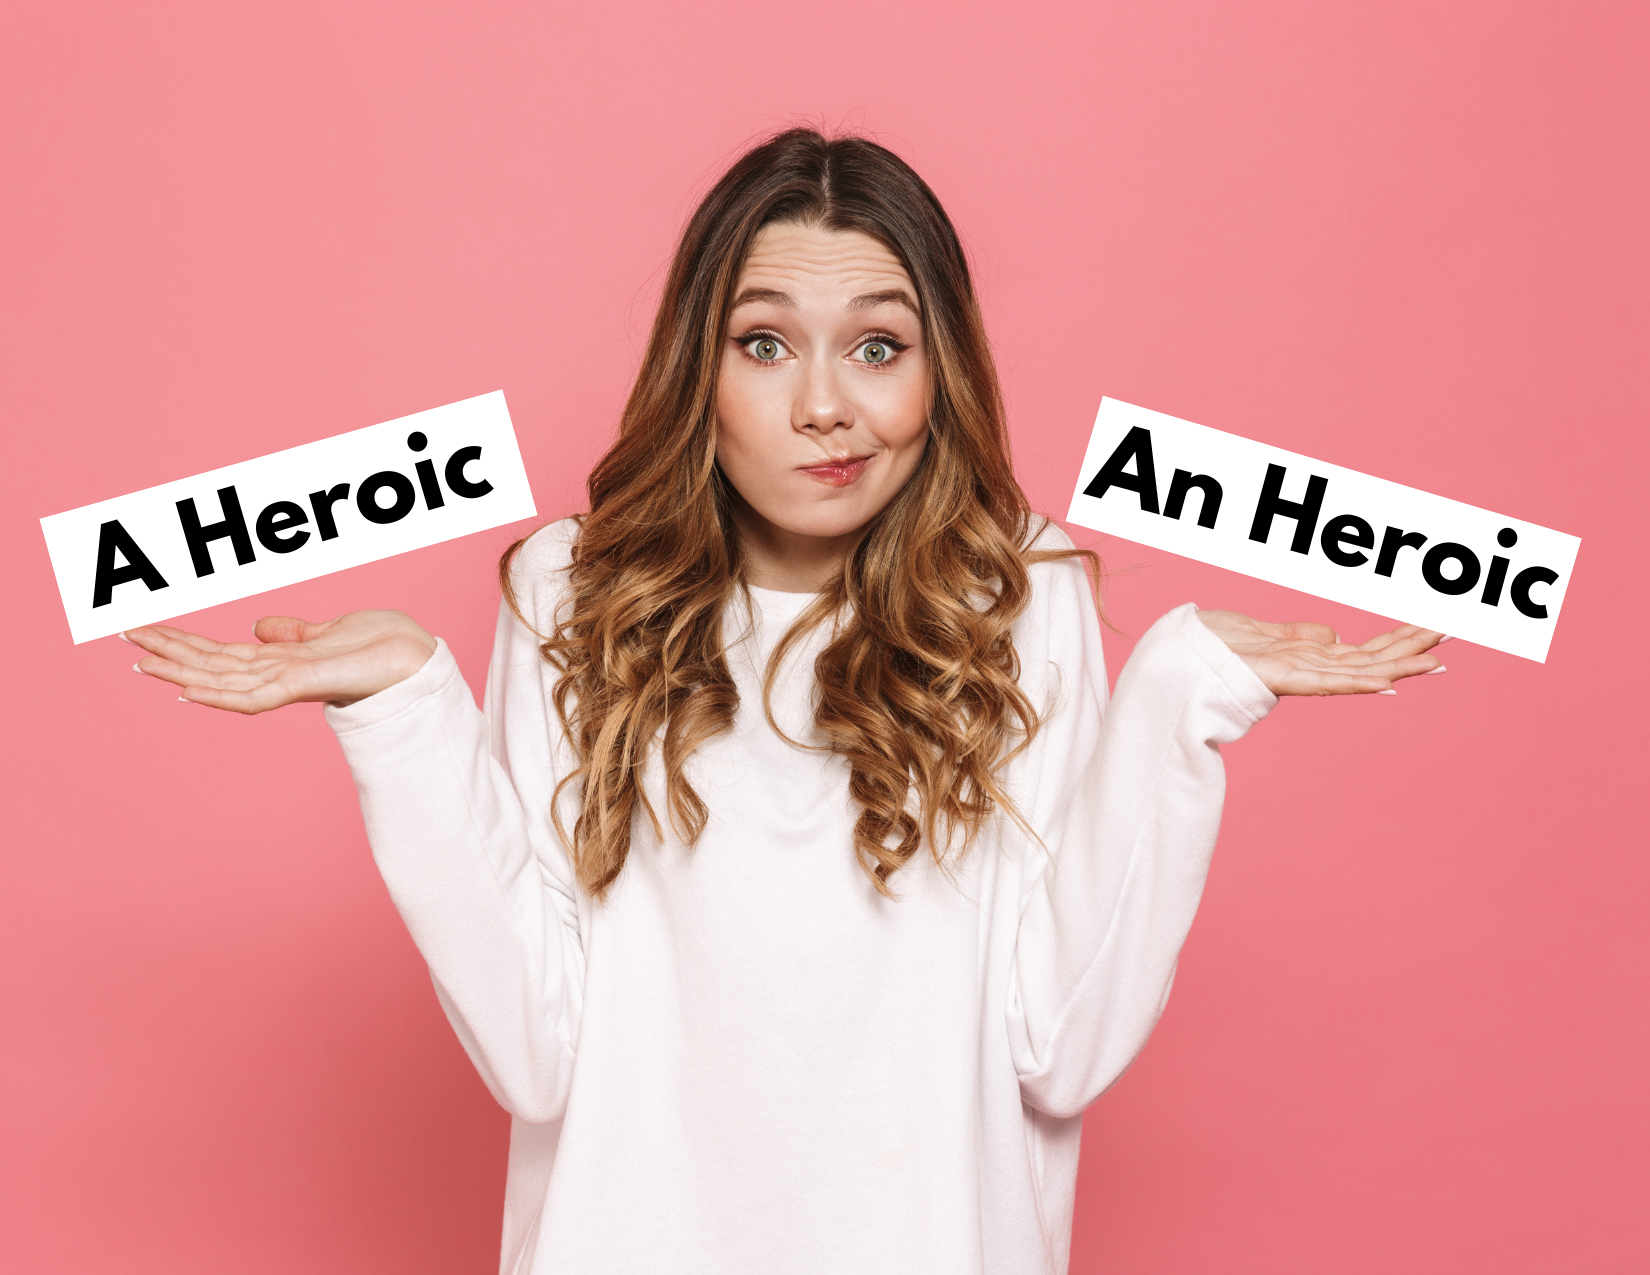 A picture of a young woman comparing the phrases a heroic and an heroic to underline the question of a or an before h